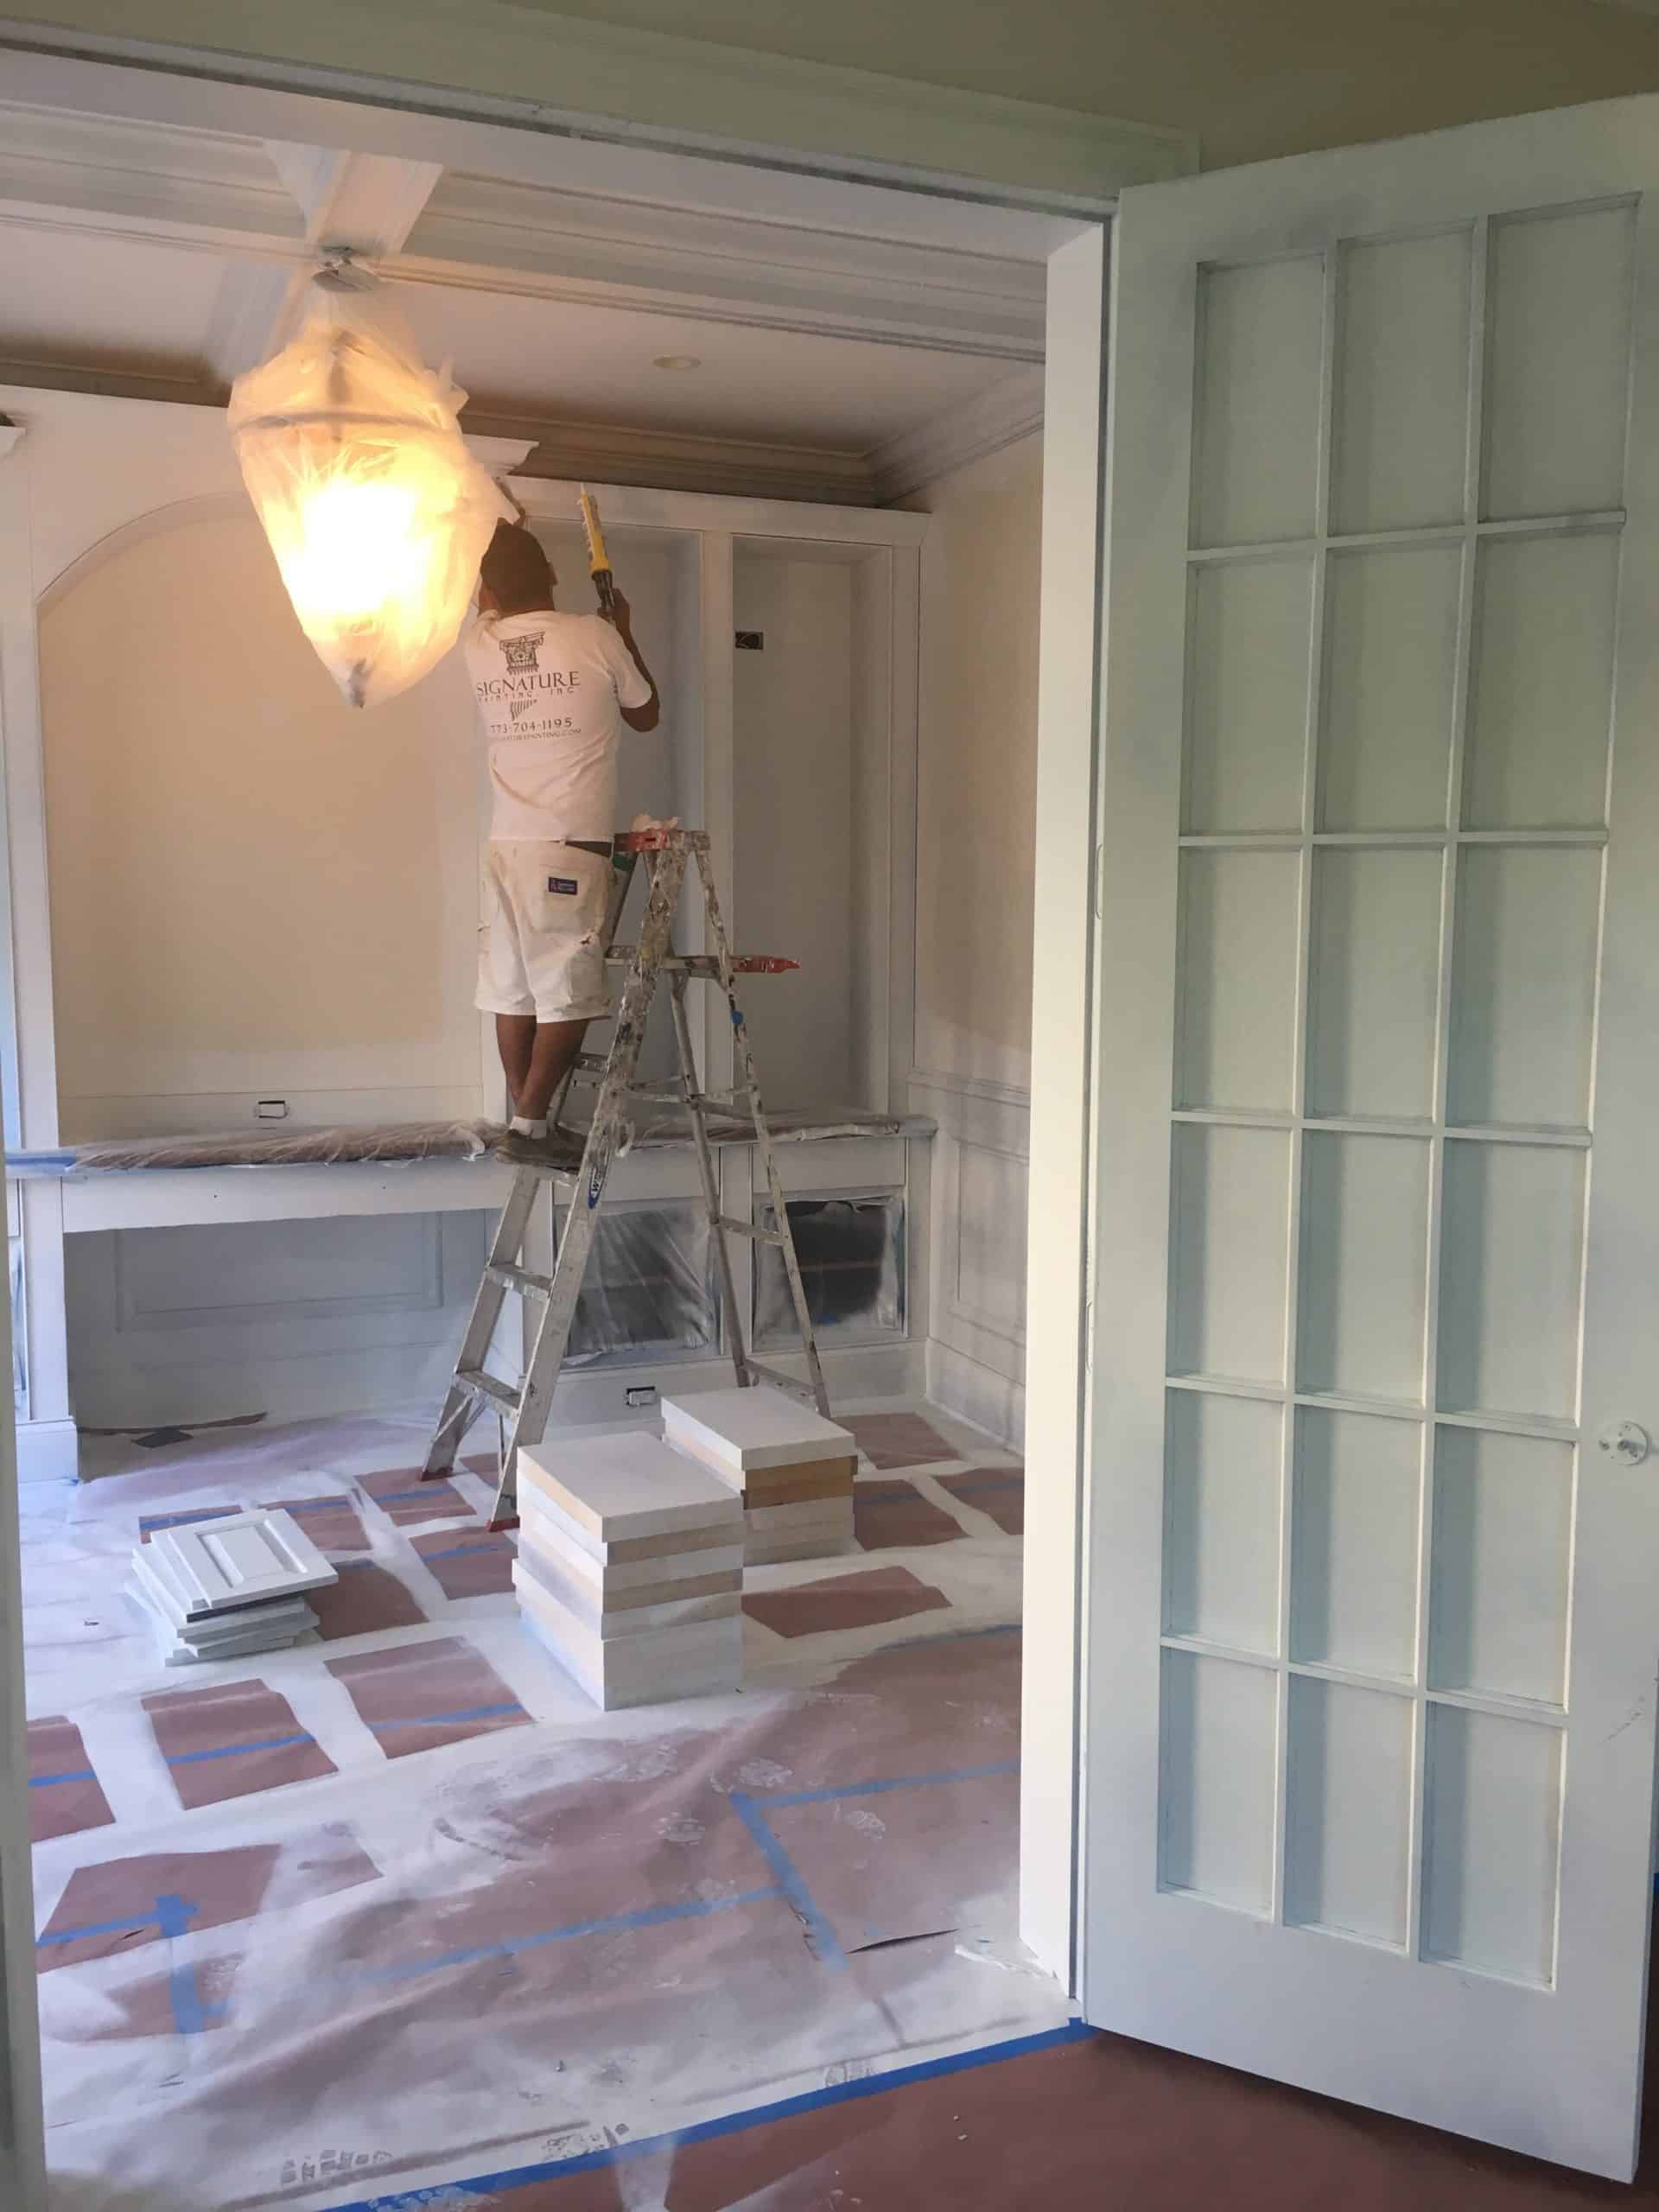 A covered room being painted